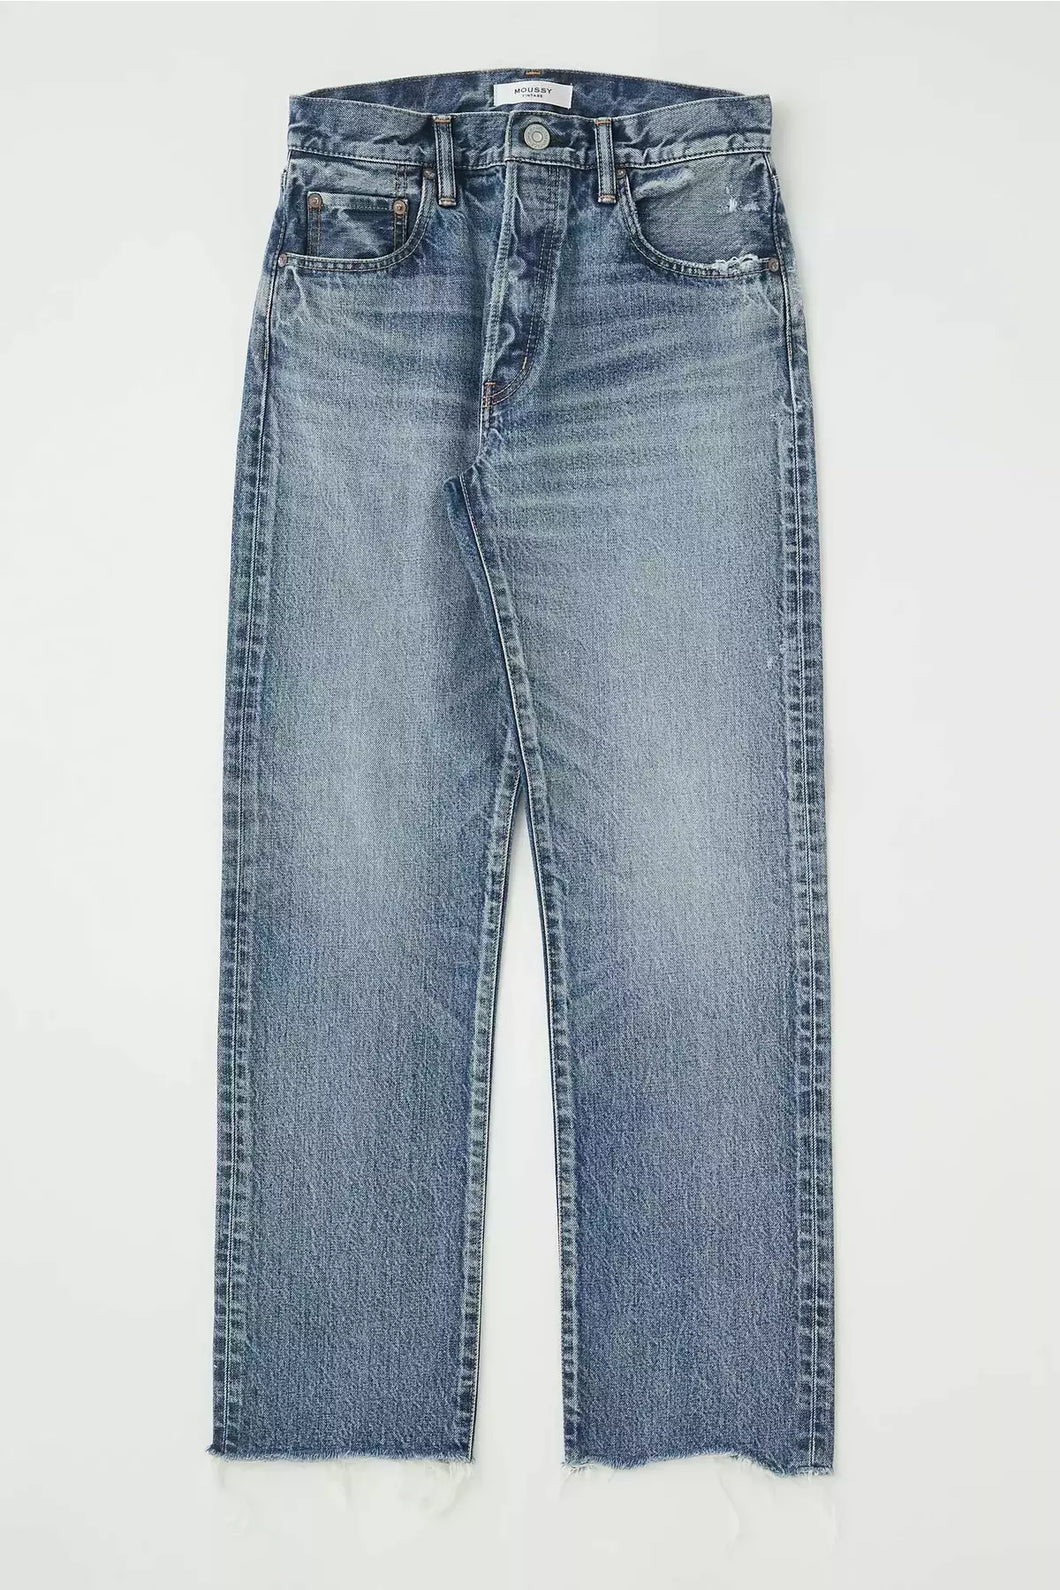 the moussy sawdust straight leg jean at west2westport.com